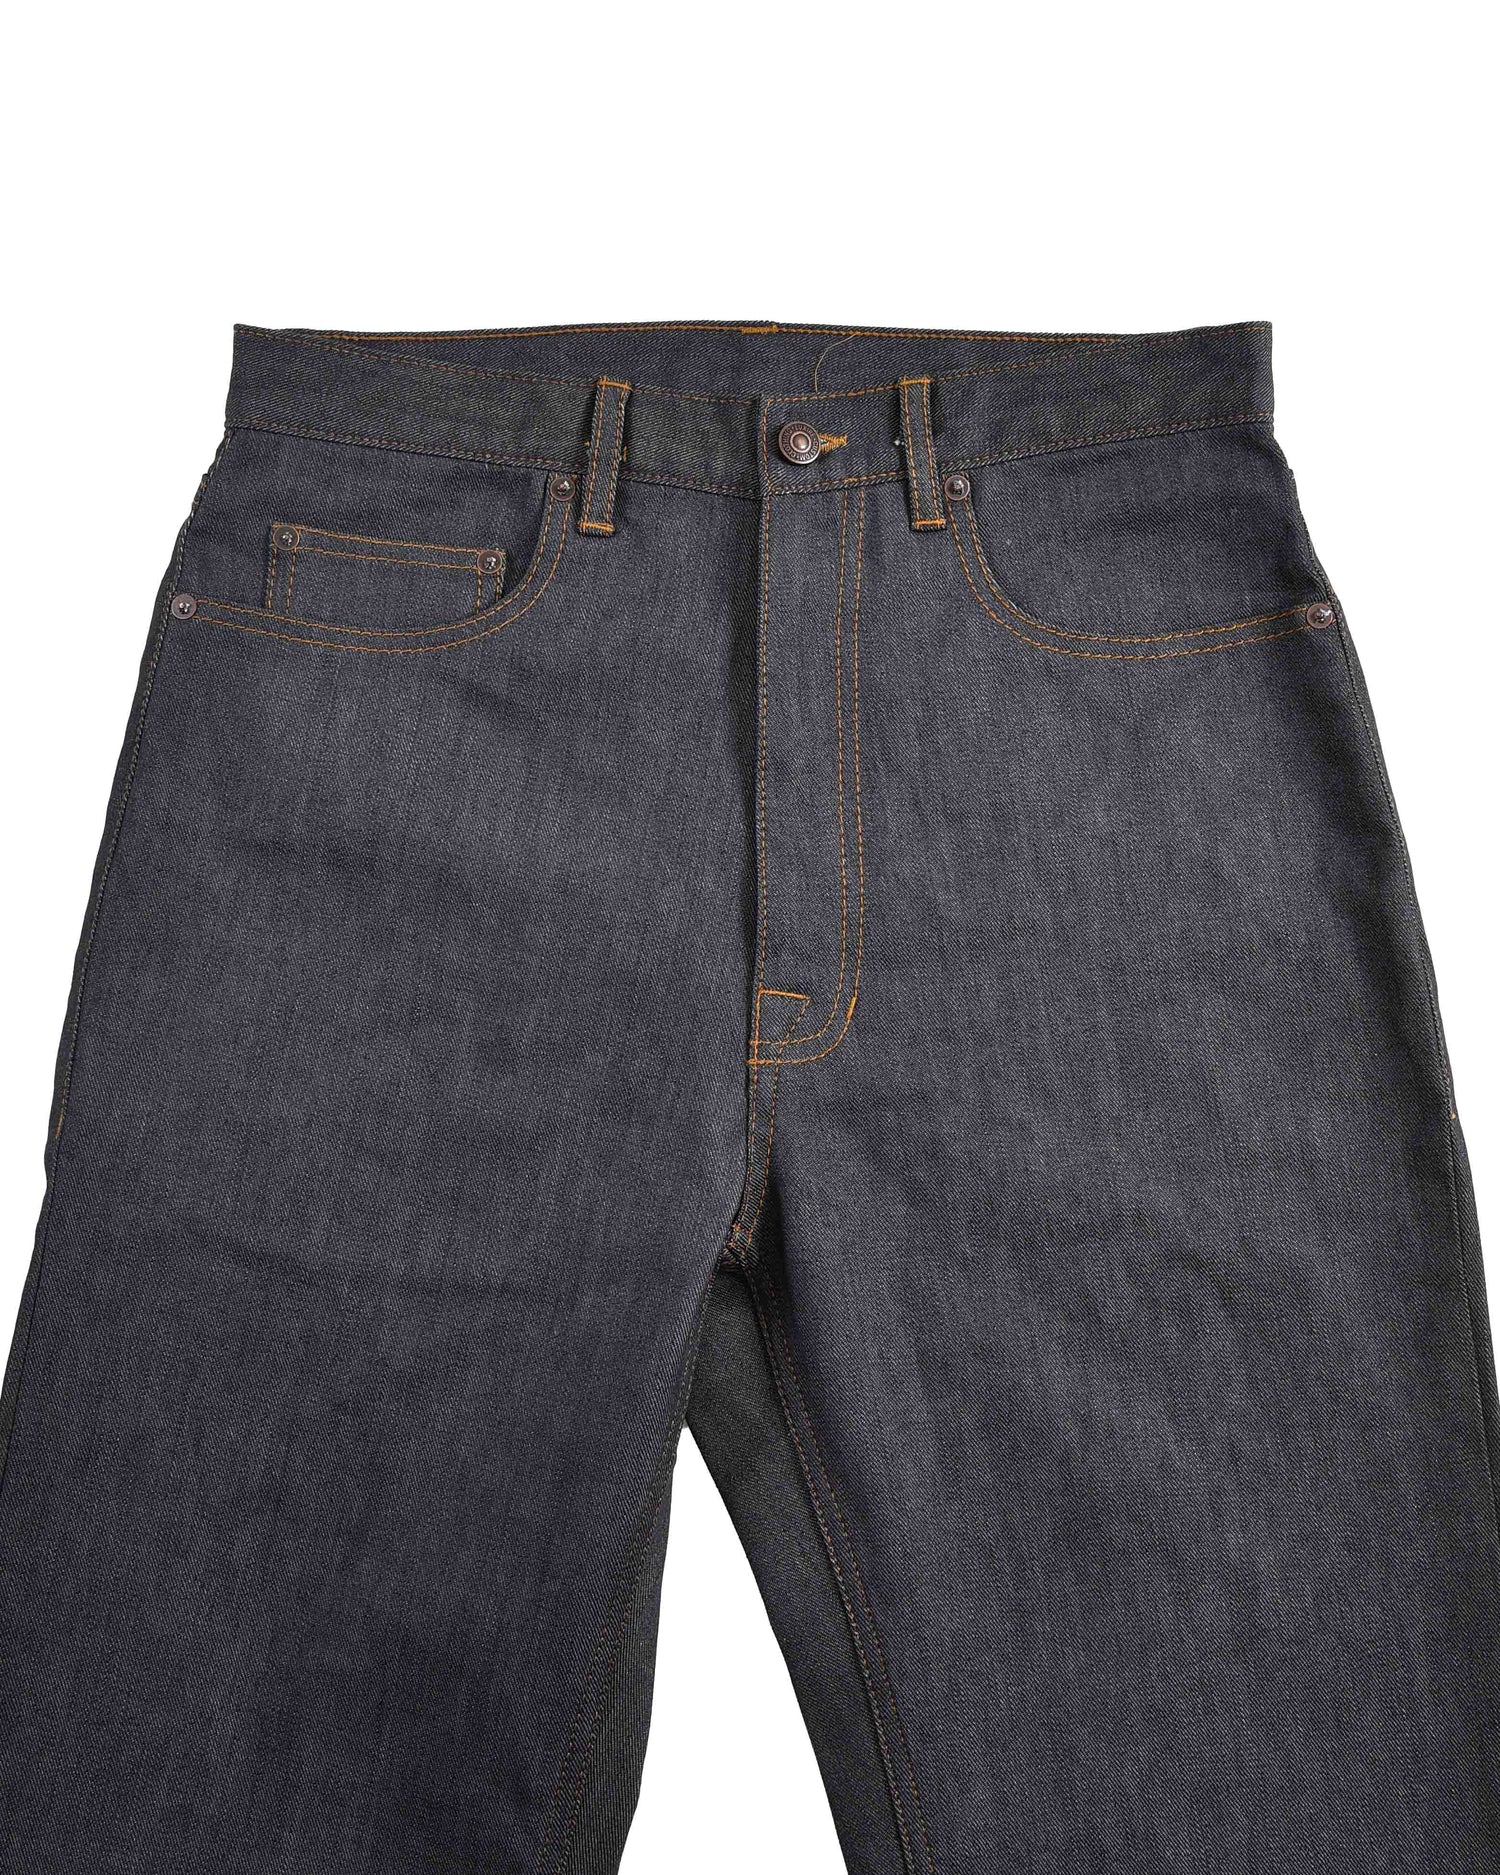 Front view of stretchable jeans for men by Luxire in dark grey